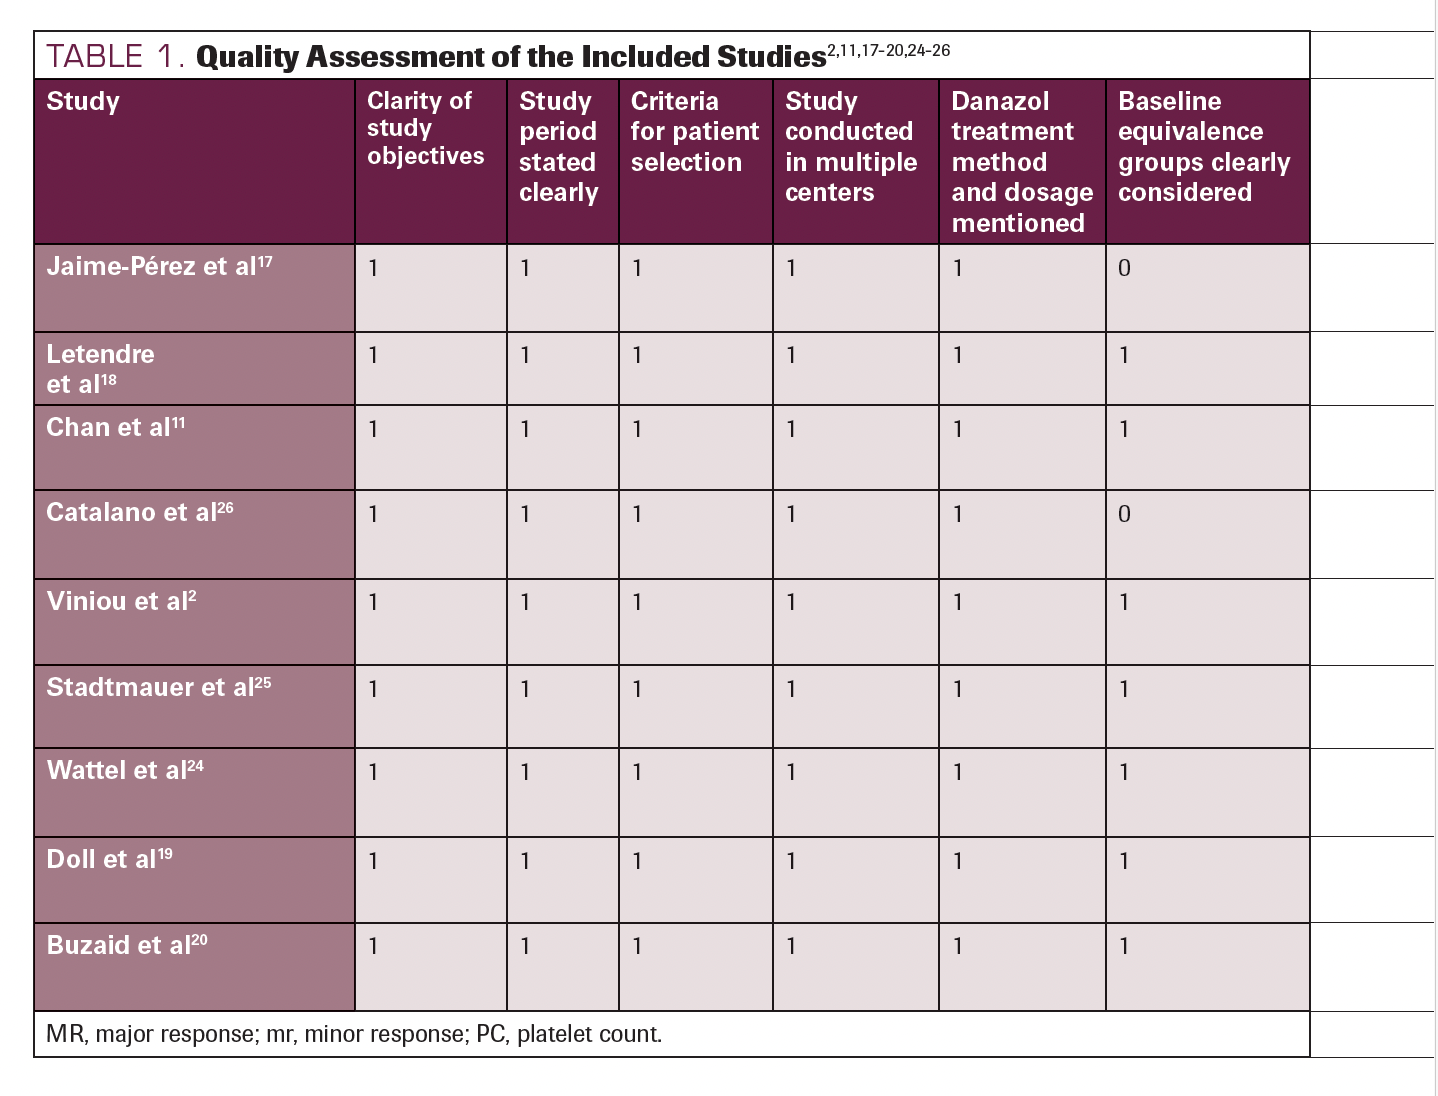 TABLE 1. Quality Assessment of the Included Studies2,11,17-20,24-26